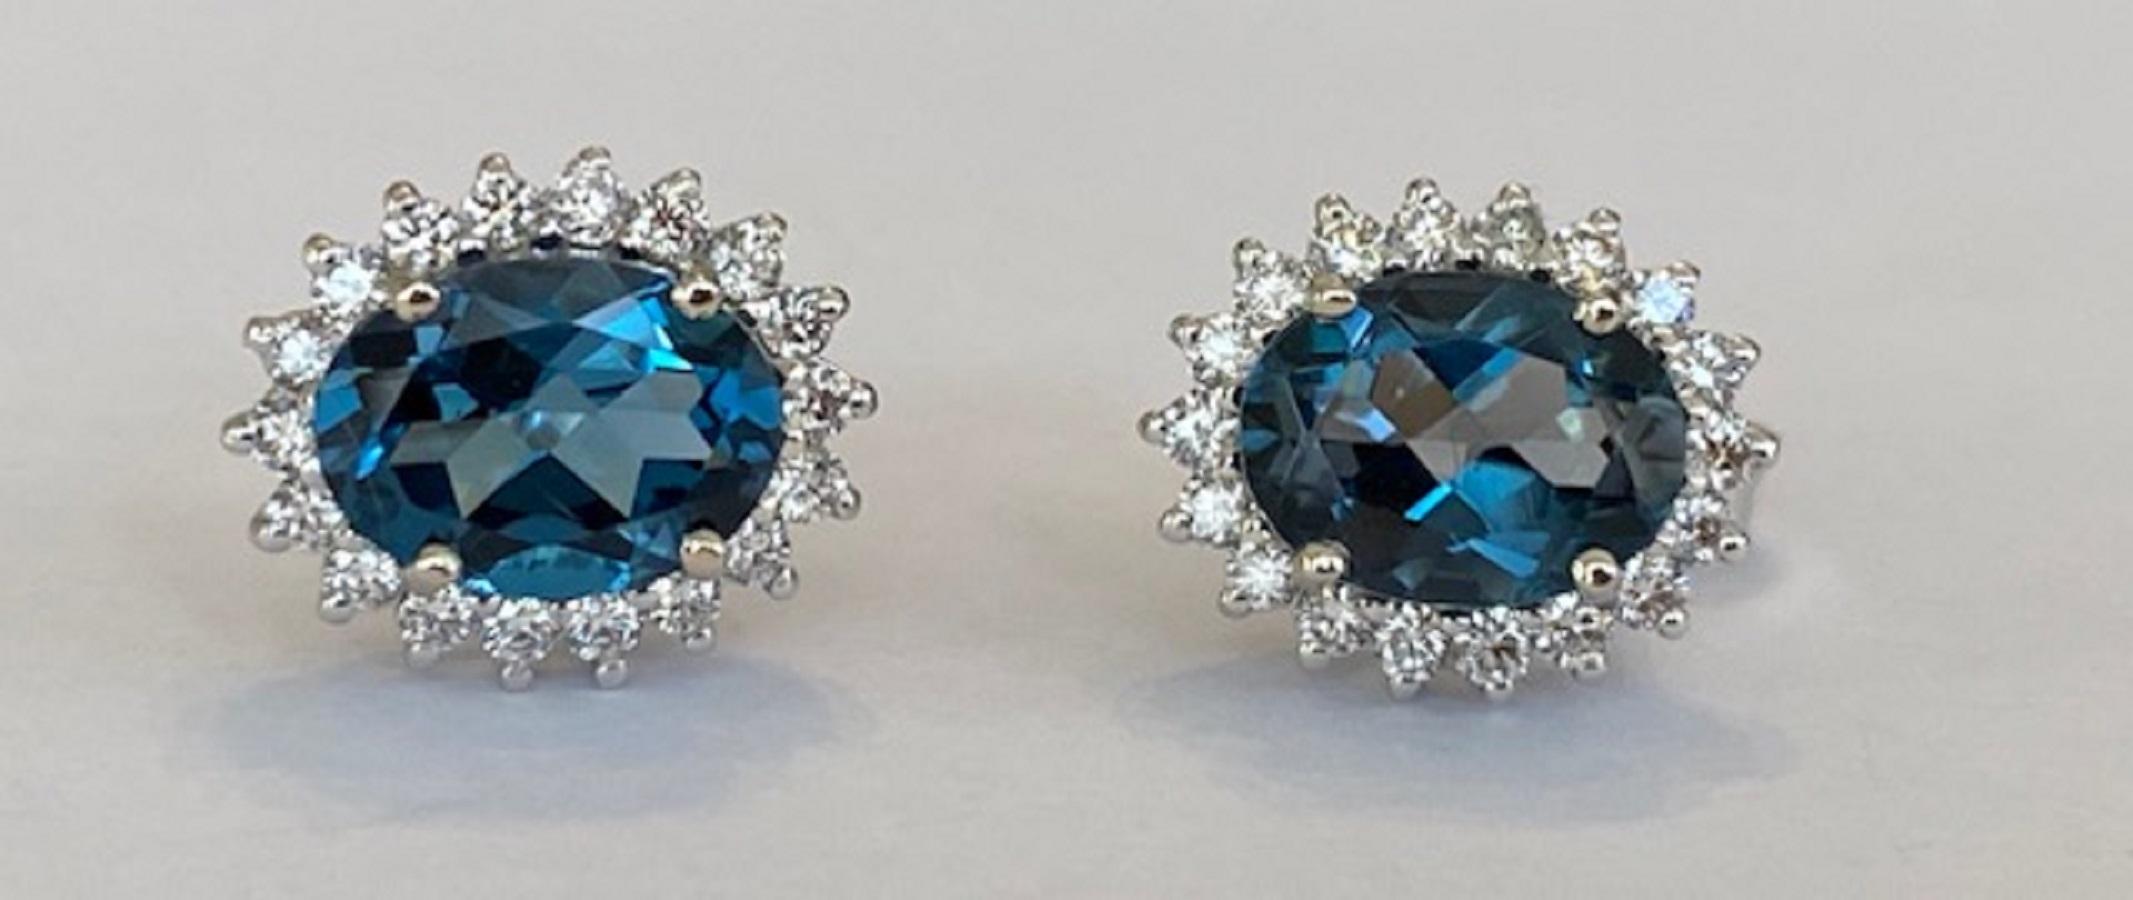 Ear studs in white gold, offered in new condition, with two pieces of oval cut London Blue Topaz approx. 2.5 carats together. The stones are surrounded by an entourage of 36 brilliant cut diamonds in total approx. 0.30 ct of G/VS quality.
Gold